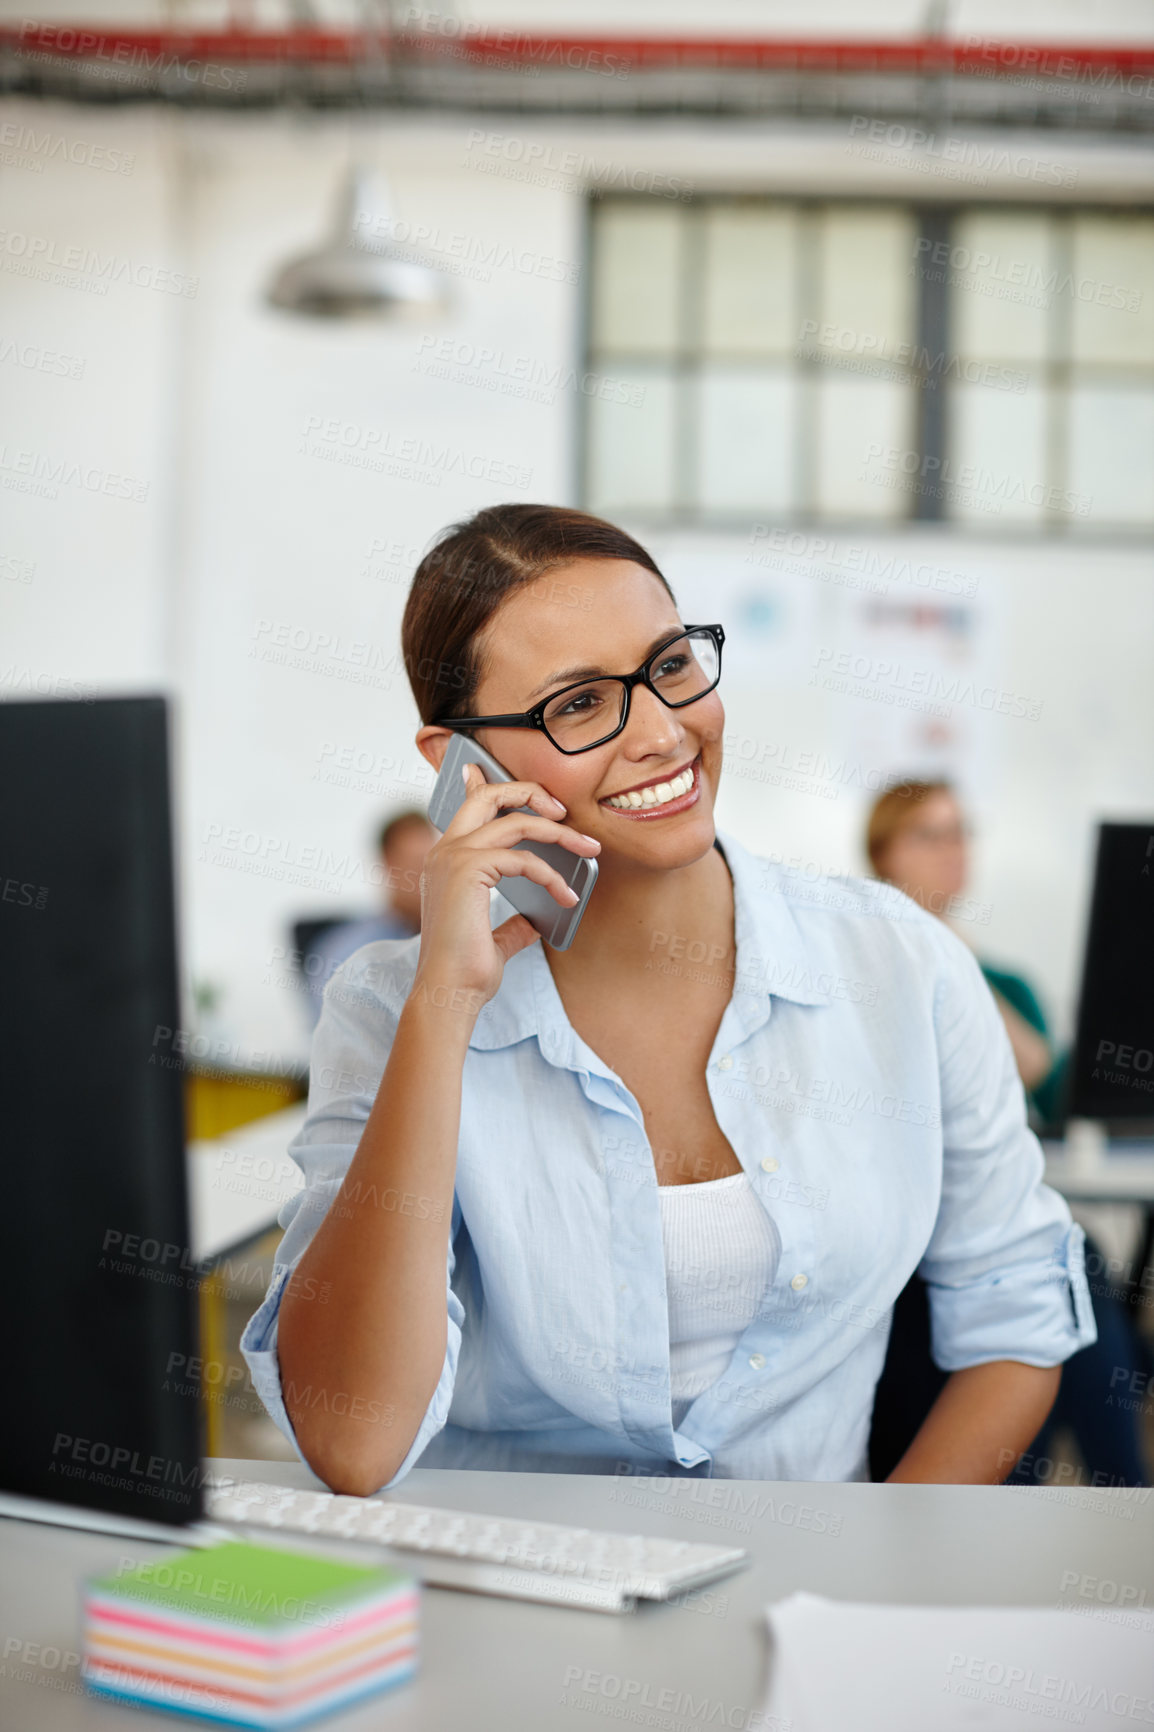 Buy stock photo Shot of a young female designer talking on the phone while sitting at her desk